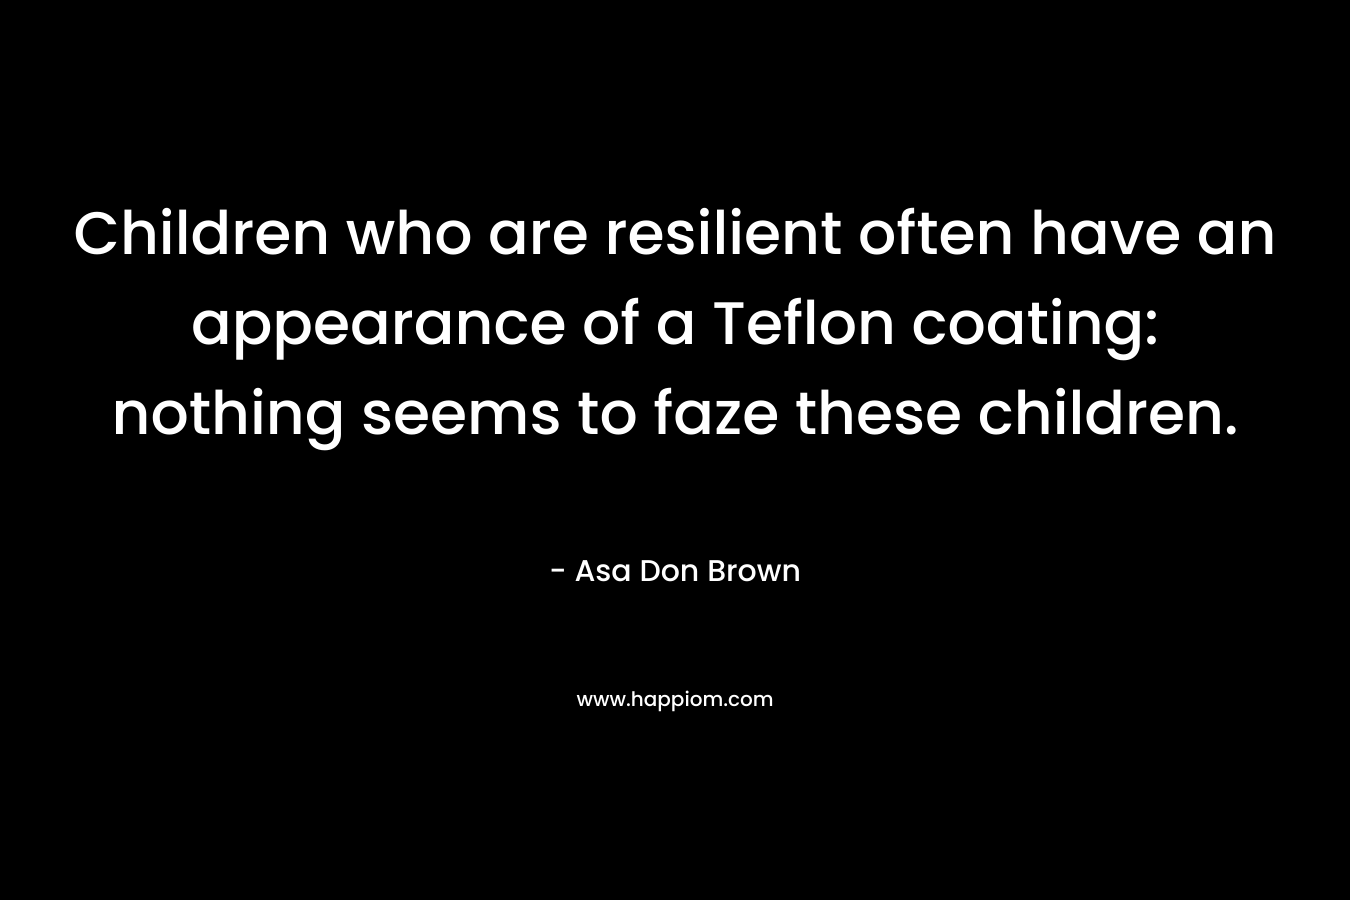 Children who are resilient often have an appearance of a Teflon coating: nothing seems to faze these children.